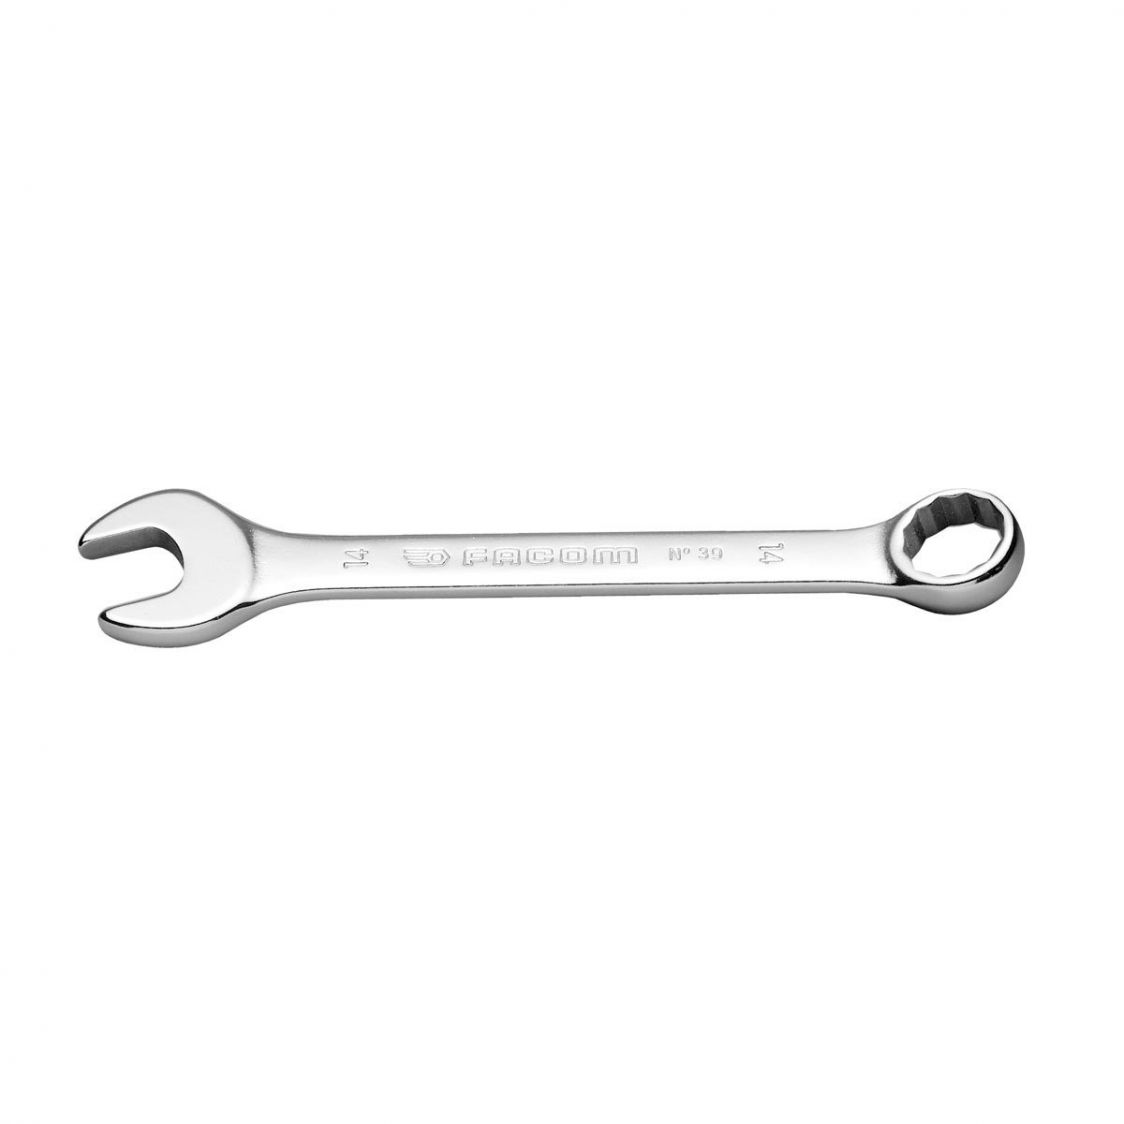 FACOM 39.14 - 14mm Metric Stubby Combination Spanner